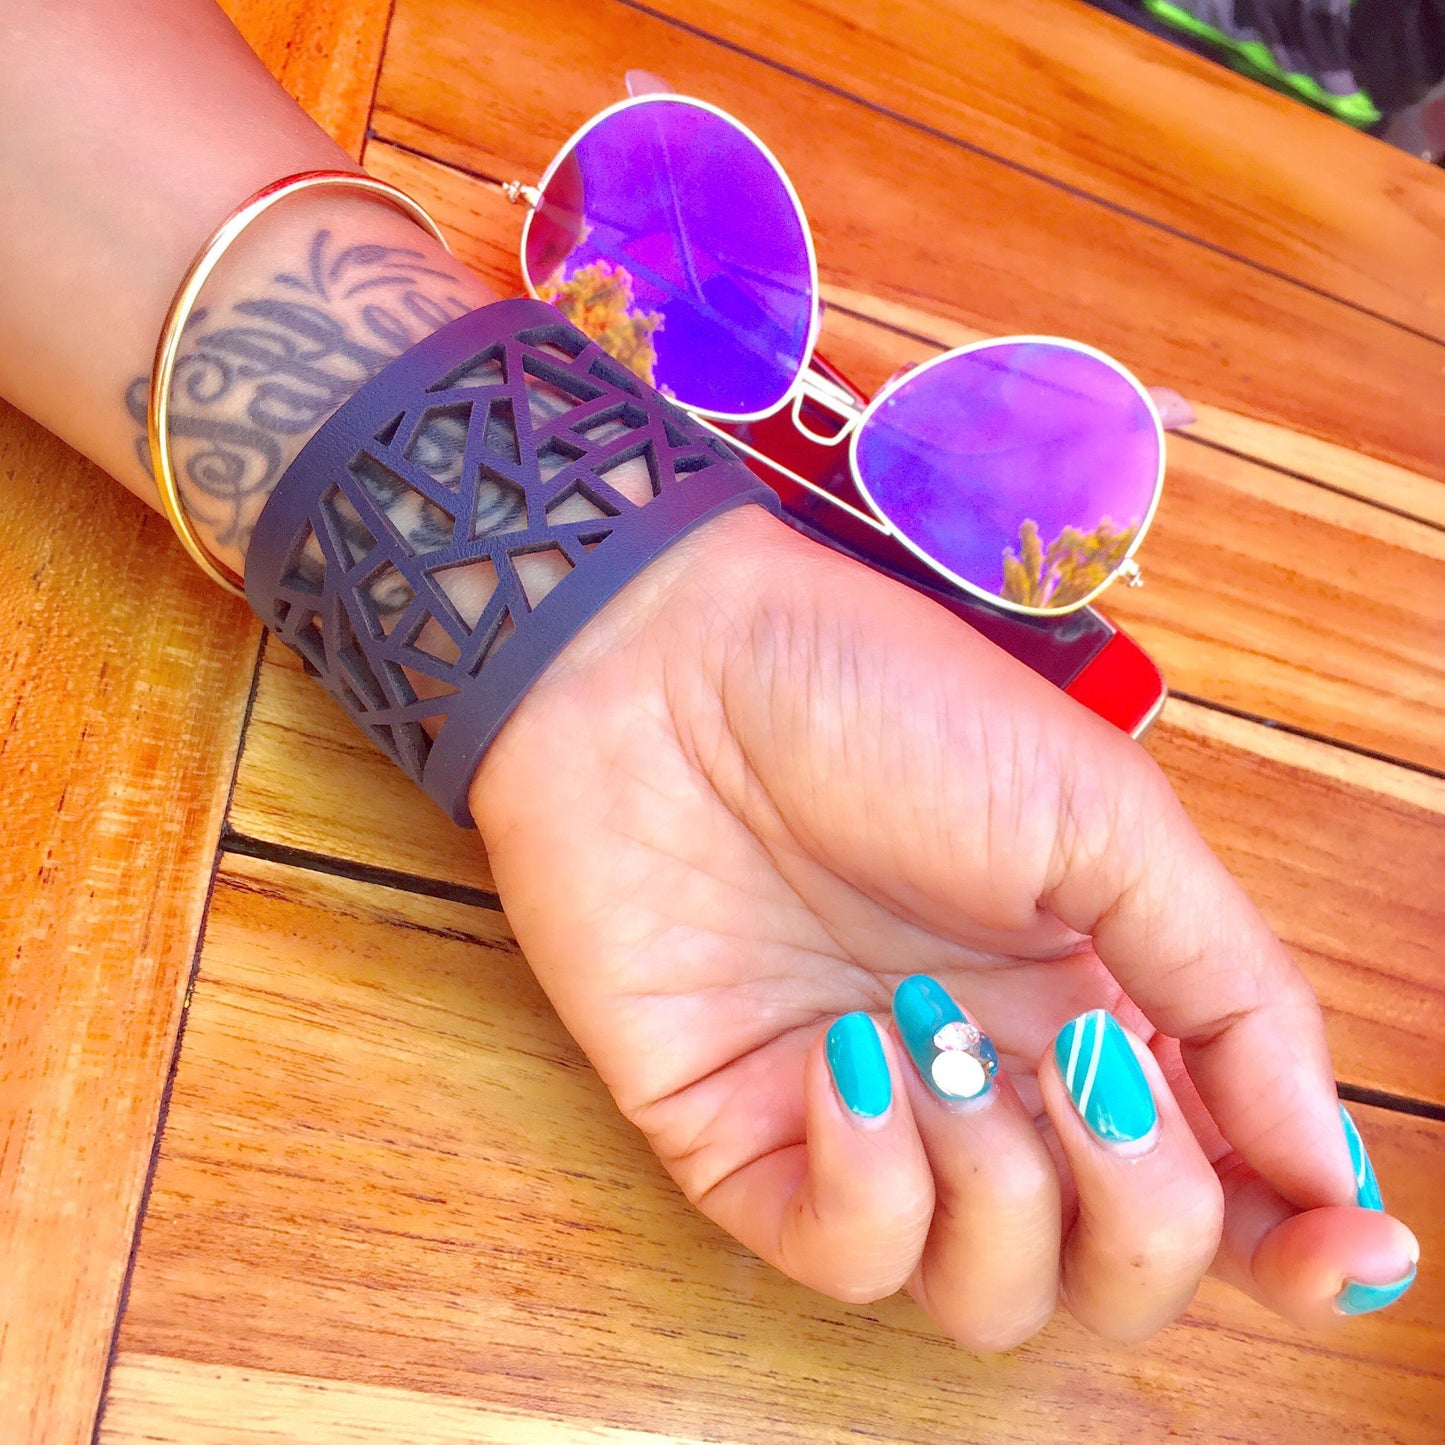 Blue manicured hand with tattoo against a table next to sunglasses wearing Margaret - Lattice Leather Laser Cut Bracelet